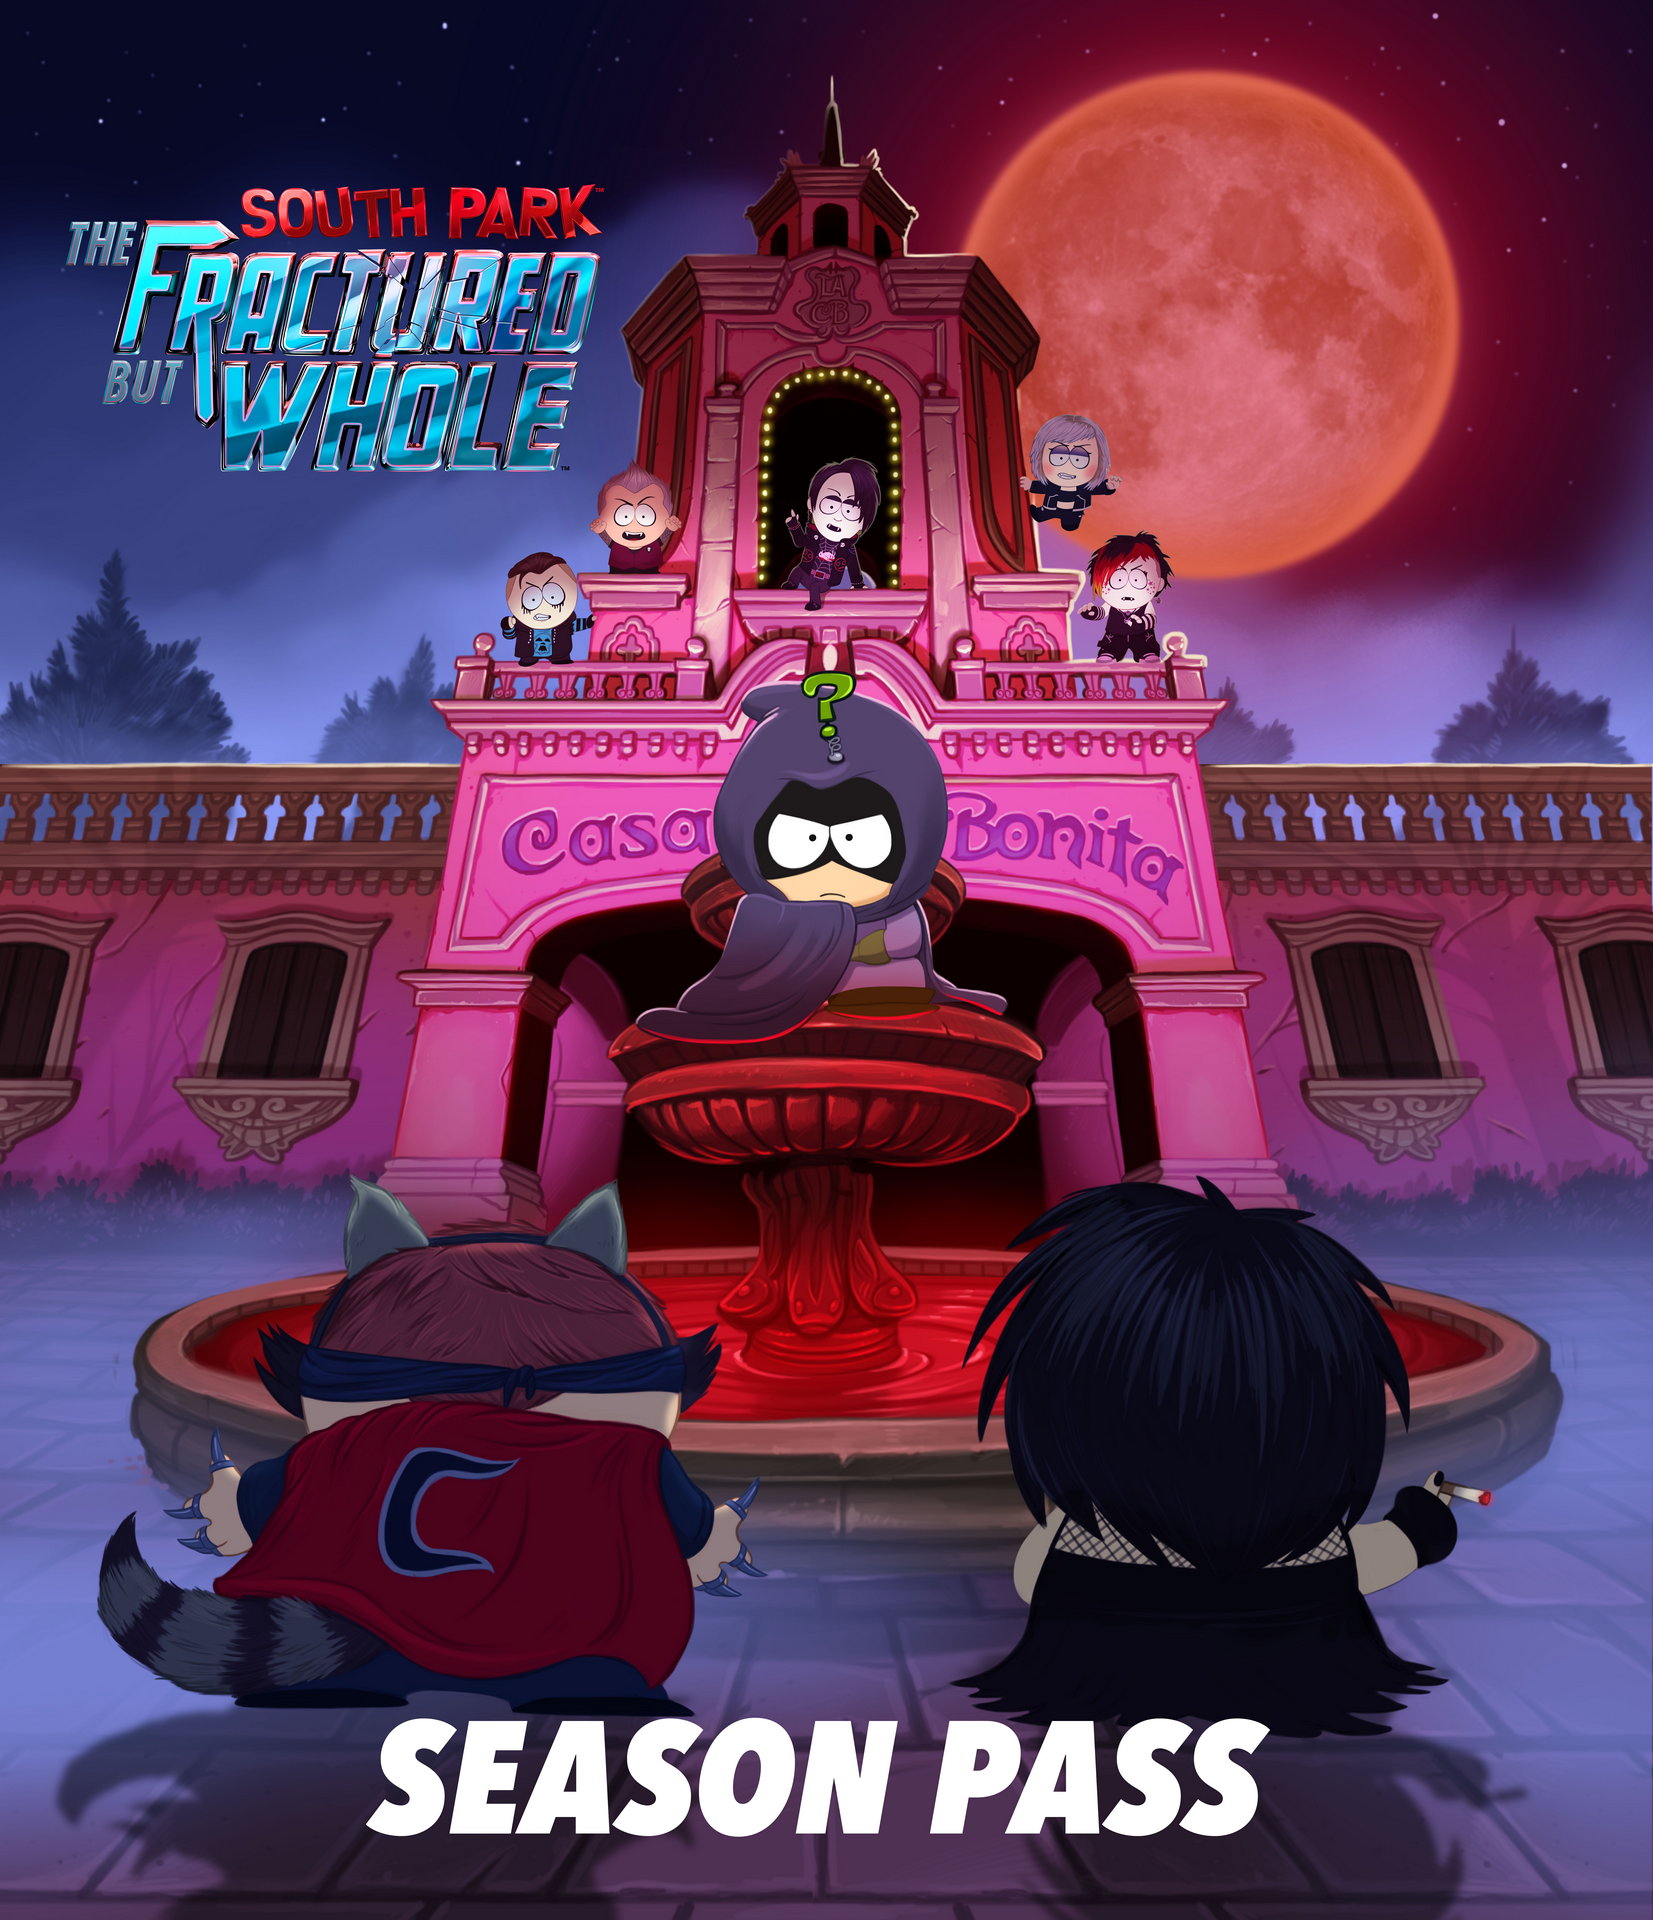 South Park: The Fractured but Whole, постер № 2